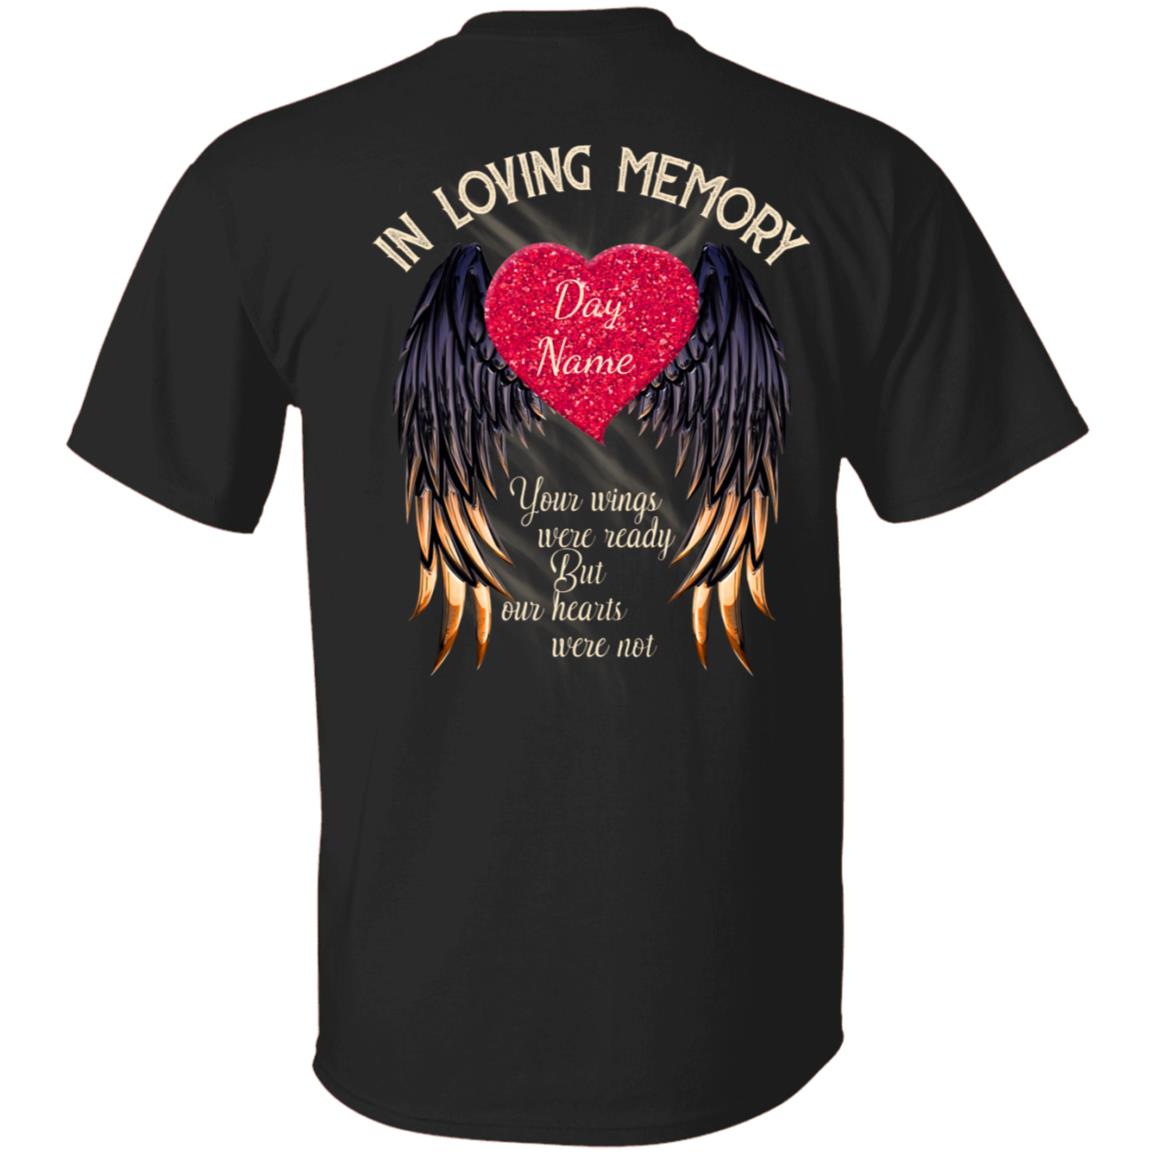 Personalized In Loving Memory Your Wings Were Ready But Our Hearts Were Not T Shirt Customize